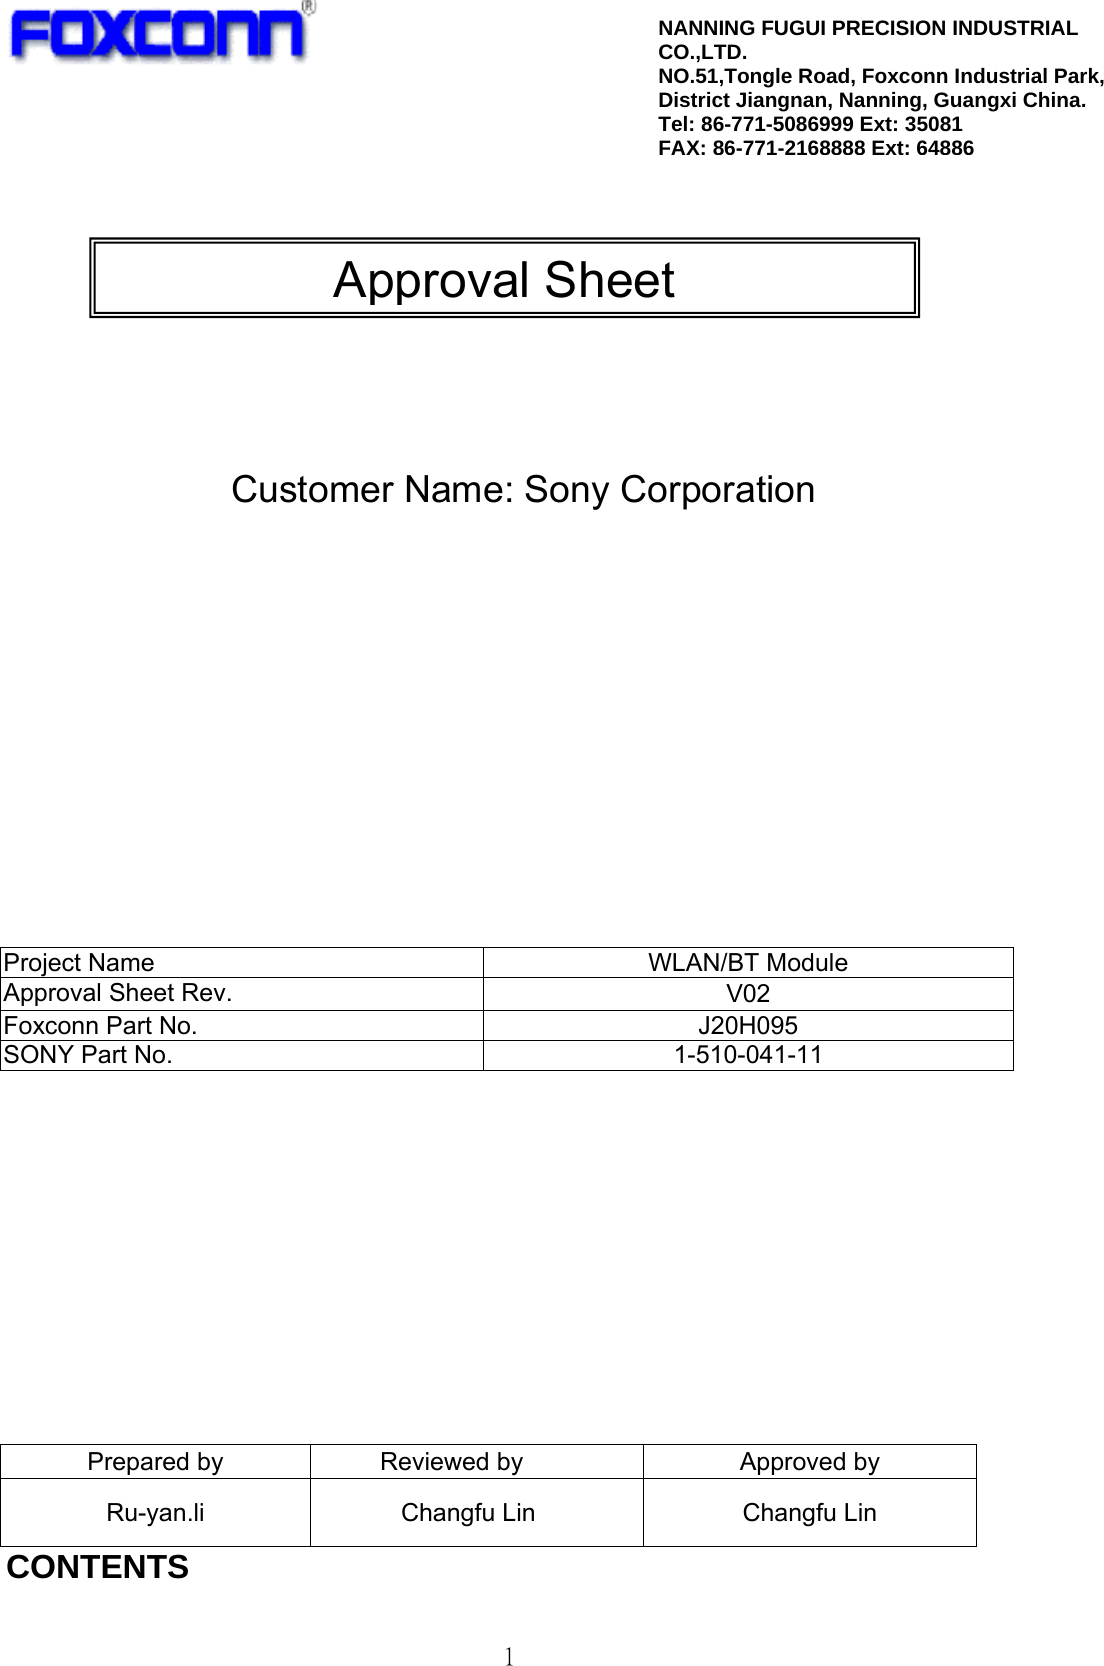   1             Customer Name: Sony Corporation               Project Name  WLAN/BT Module Approval Sheet Rev.  V02 Foxconn Part No.  J20H095   SONY Part No.  1-510-041-11            Prepared by  Reviewed by  Approved by Ru-yan.li  Changfu Lin  Changfu Lin CONTENTS NANNING FUGUI PRECISION INDUSTRIAL CO.,LTD. NO.51,Tongle Road, Foxconn Industrial Park, District Jiangnan, Nanning, Guangxi China. Tel: 86-771-5086999 Ext: 35081 FAX:86-771-2168888 Ext: 64886Approval Sheet